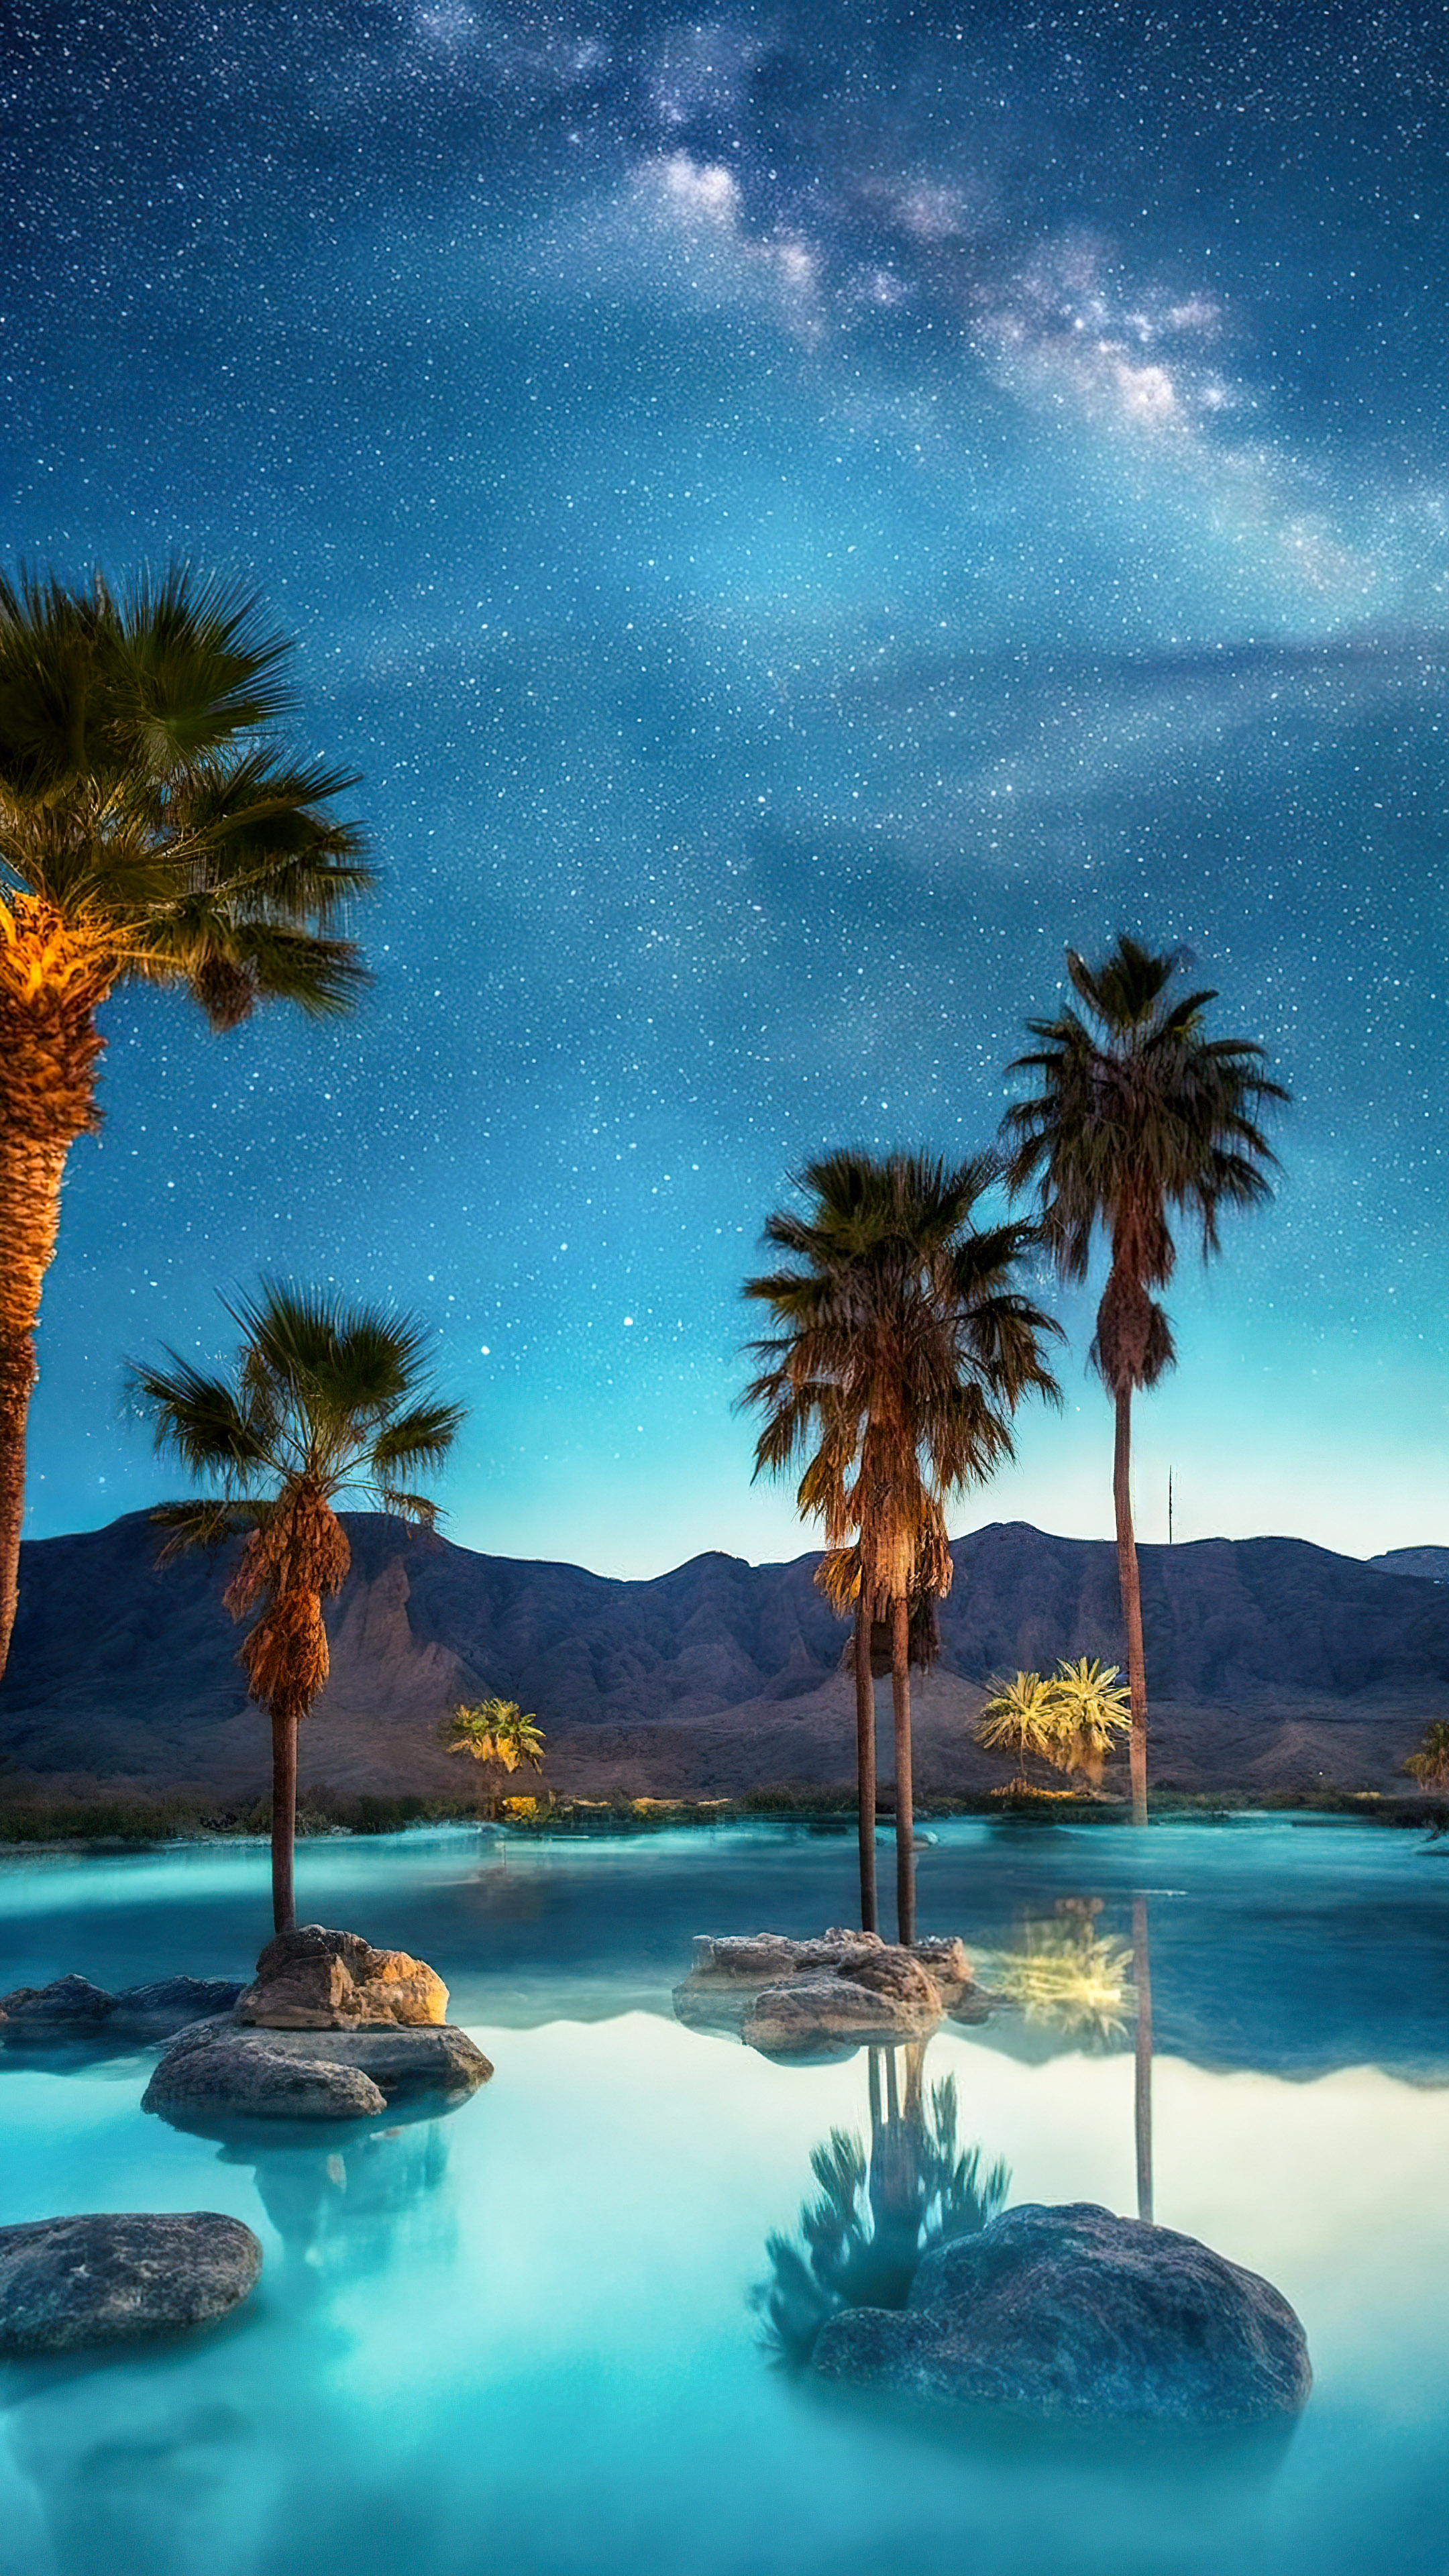 ransform your mobile device’s screen with our beach night background, where palm trees surround a serene, starry pool.